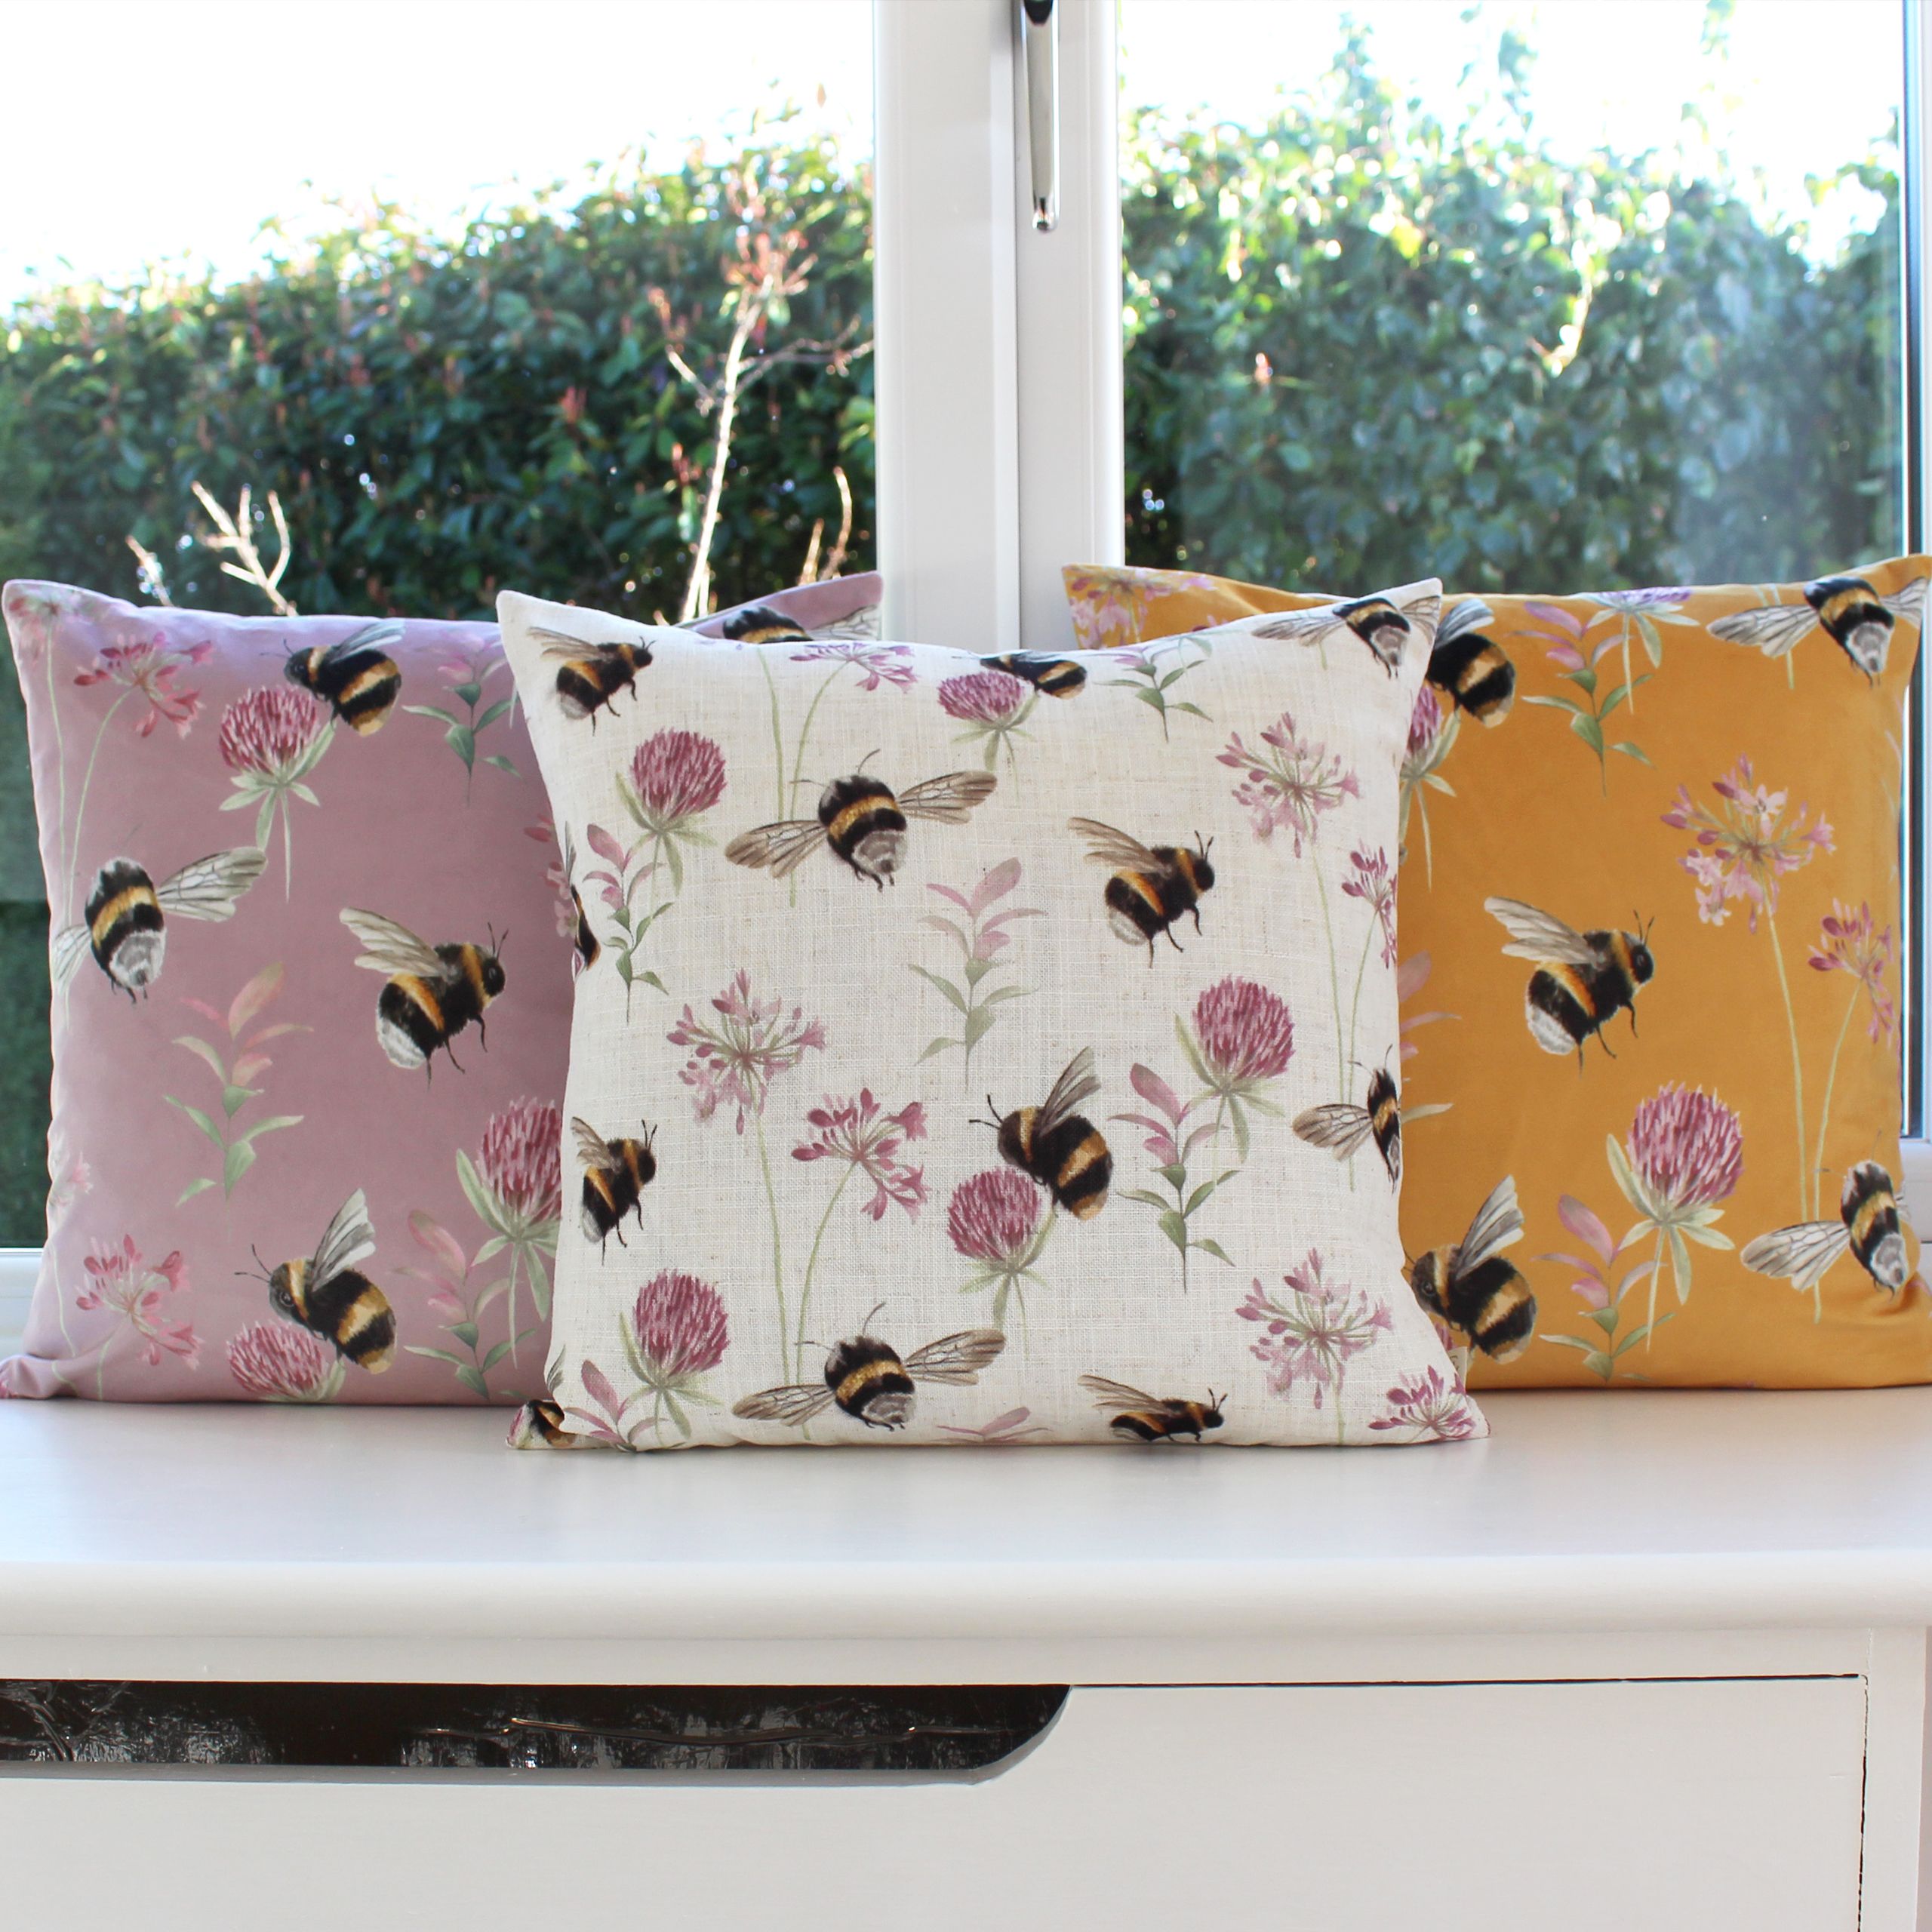 Bring a touch of the outdoors into your home with the Country Bee Garden cushion. The sweet hand-painted design, features bumble bees in flight surrounded by pretty florals. Finished on a linen-look fabric, a lovely addition to any home.